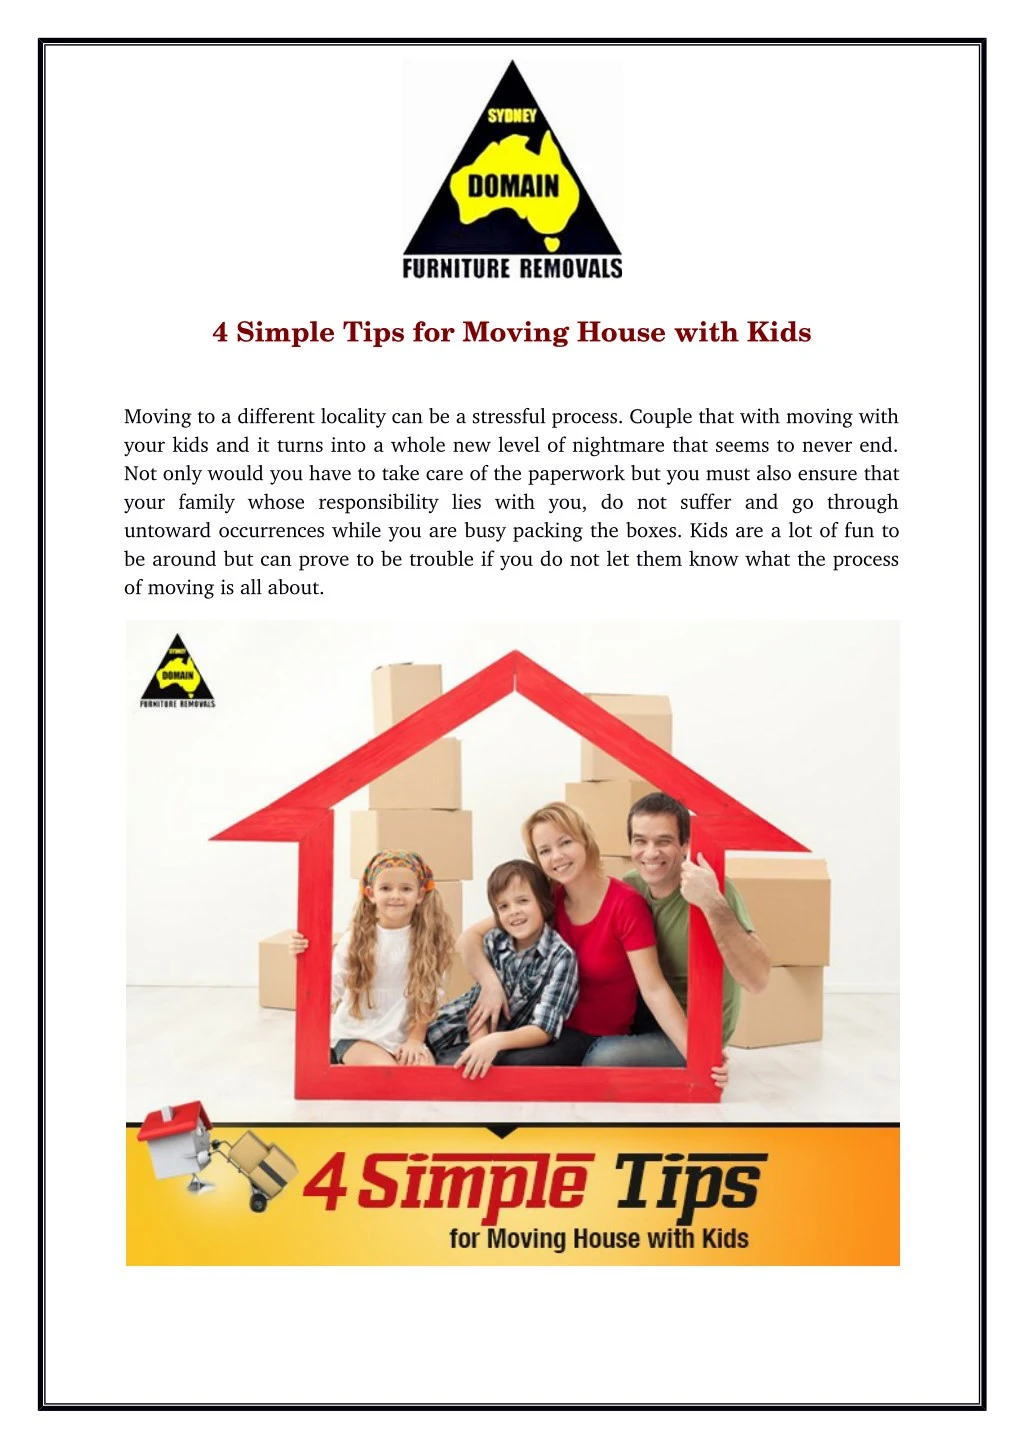 4 simple tips for moving house with kids